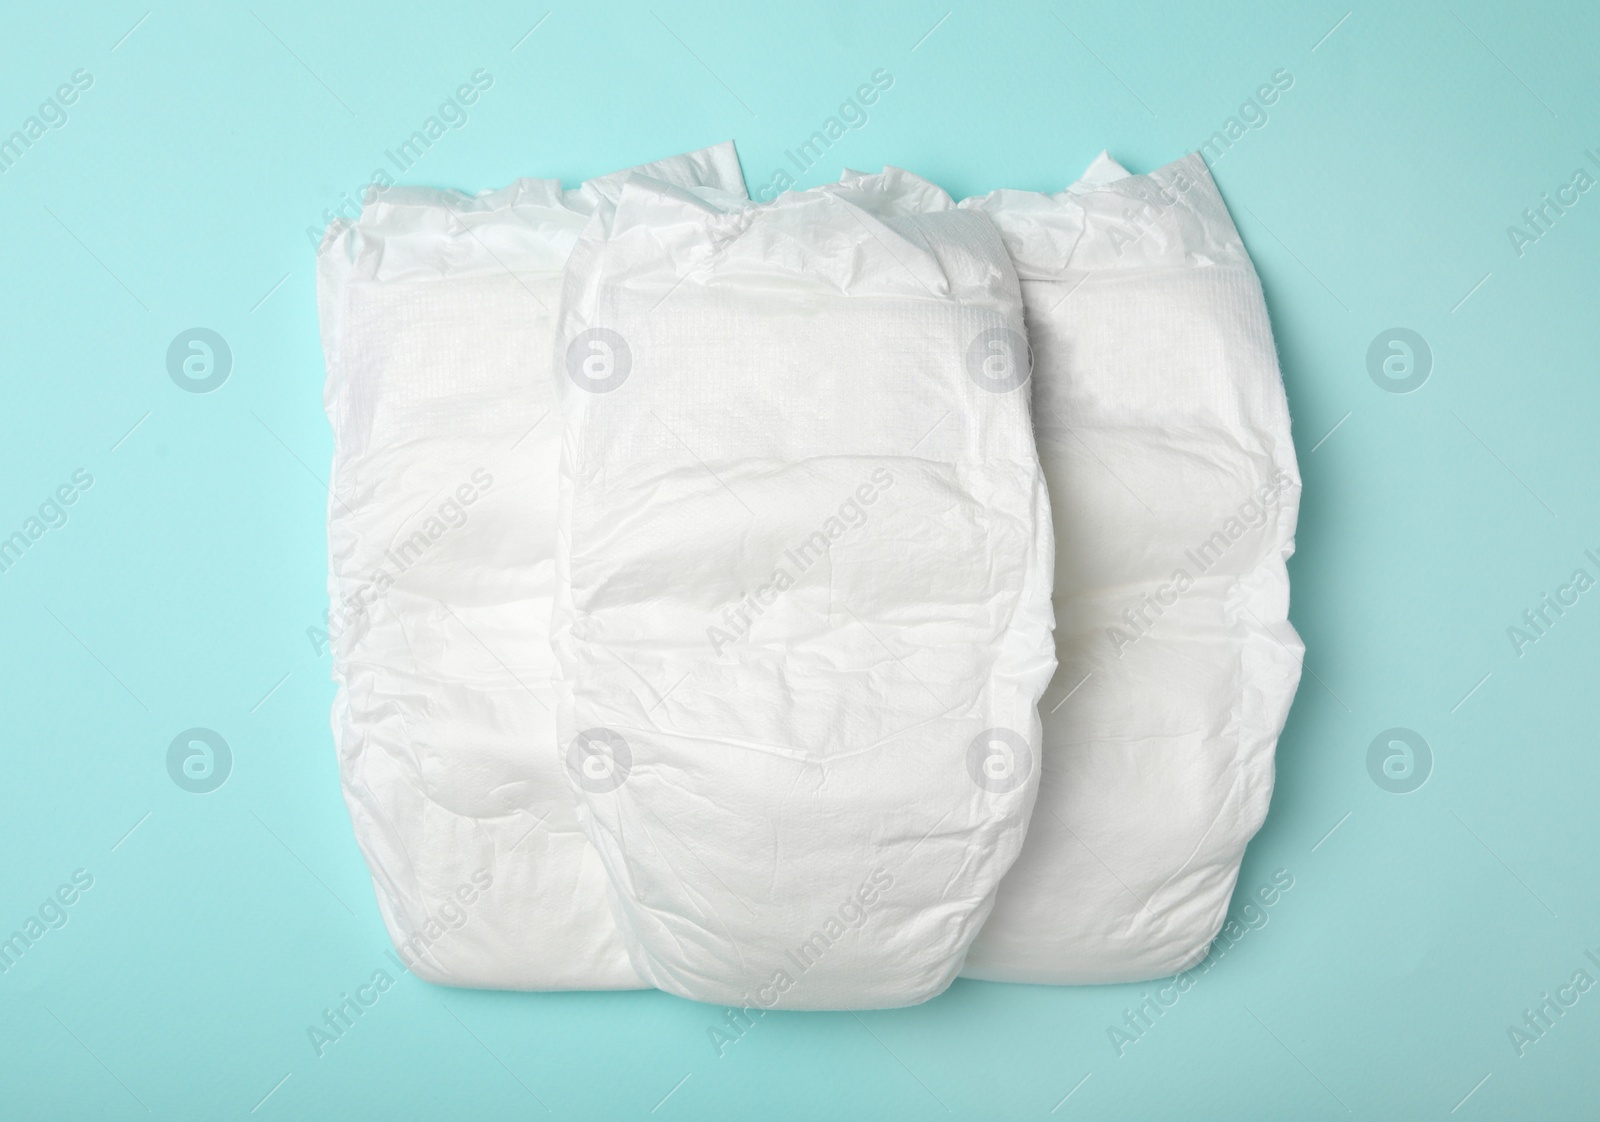 Photo of Baby diapers on turquoise background, flat lay